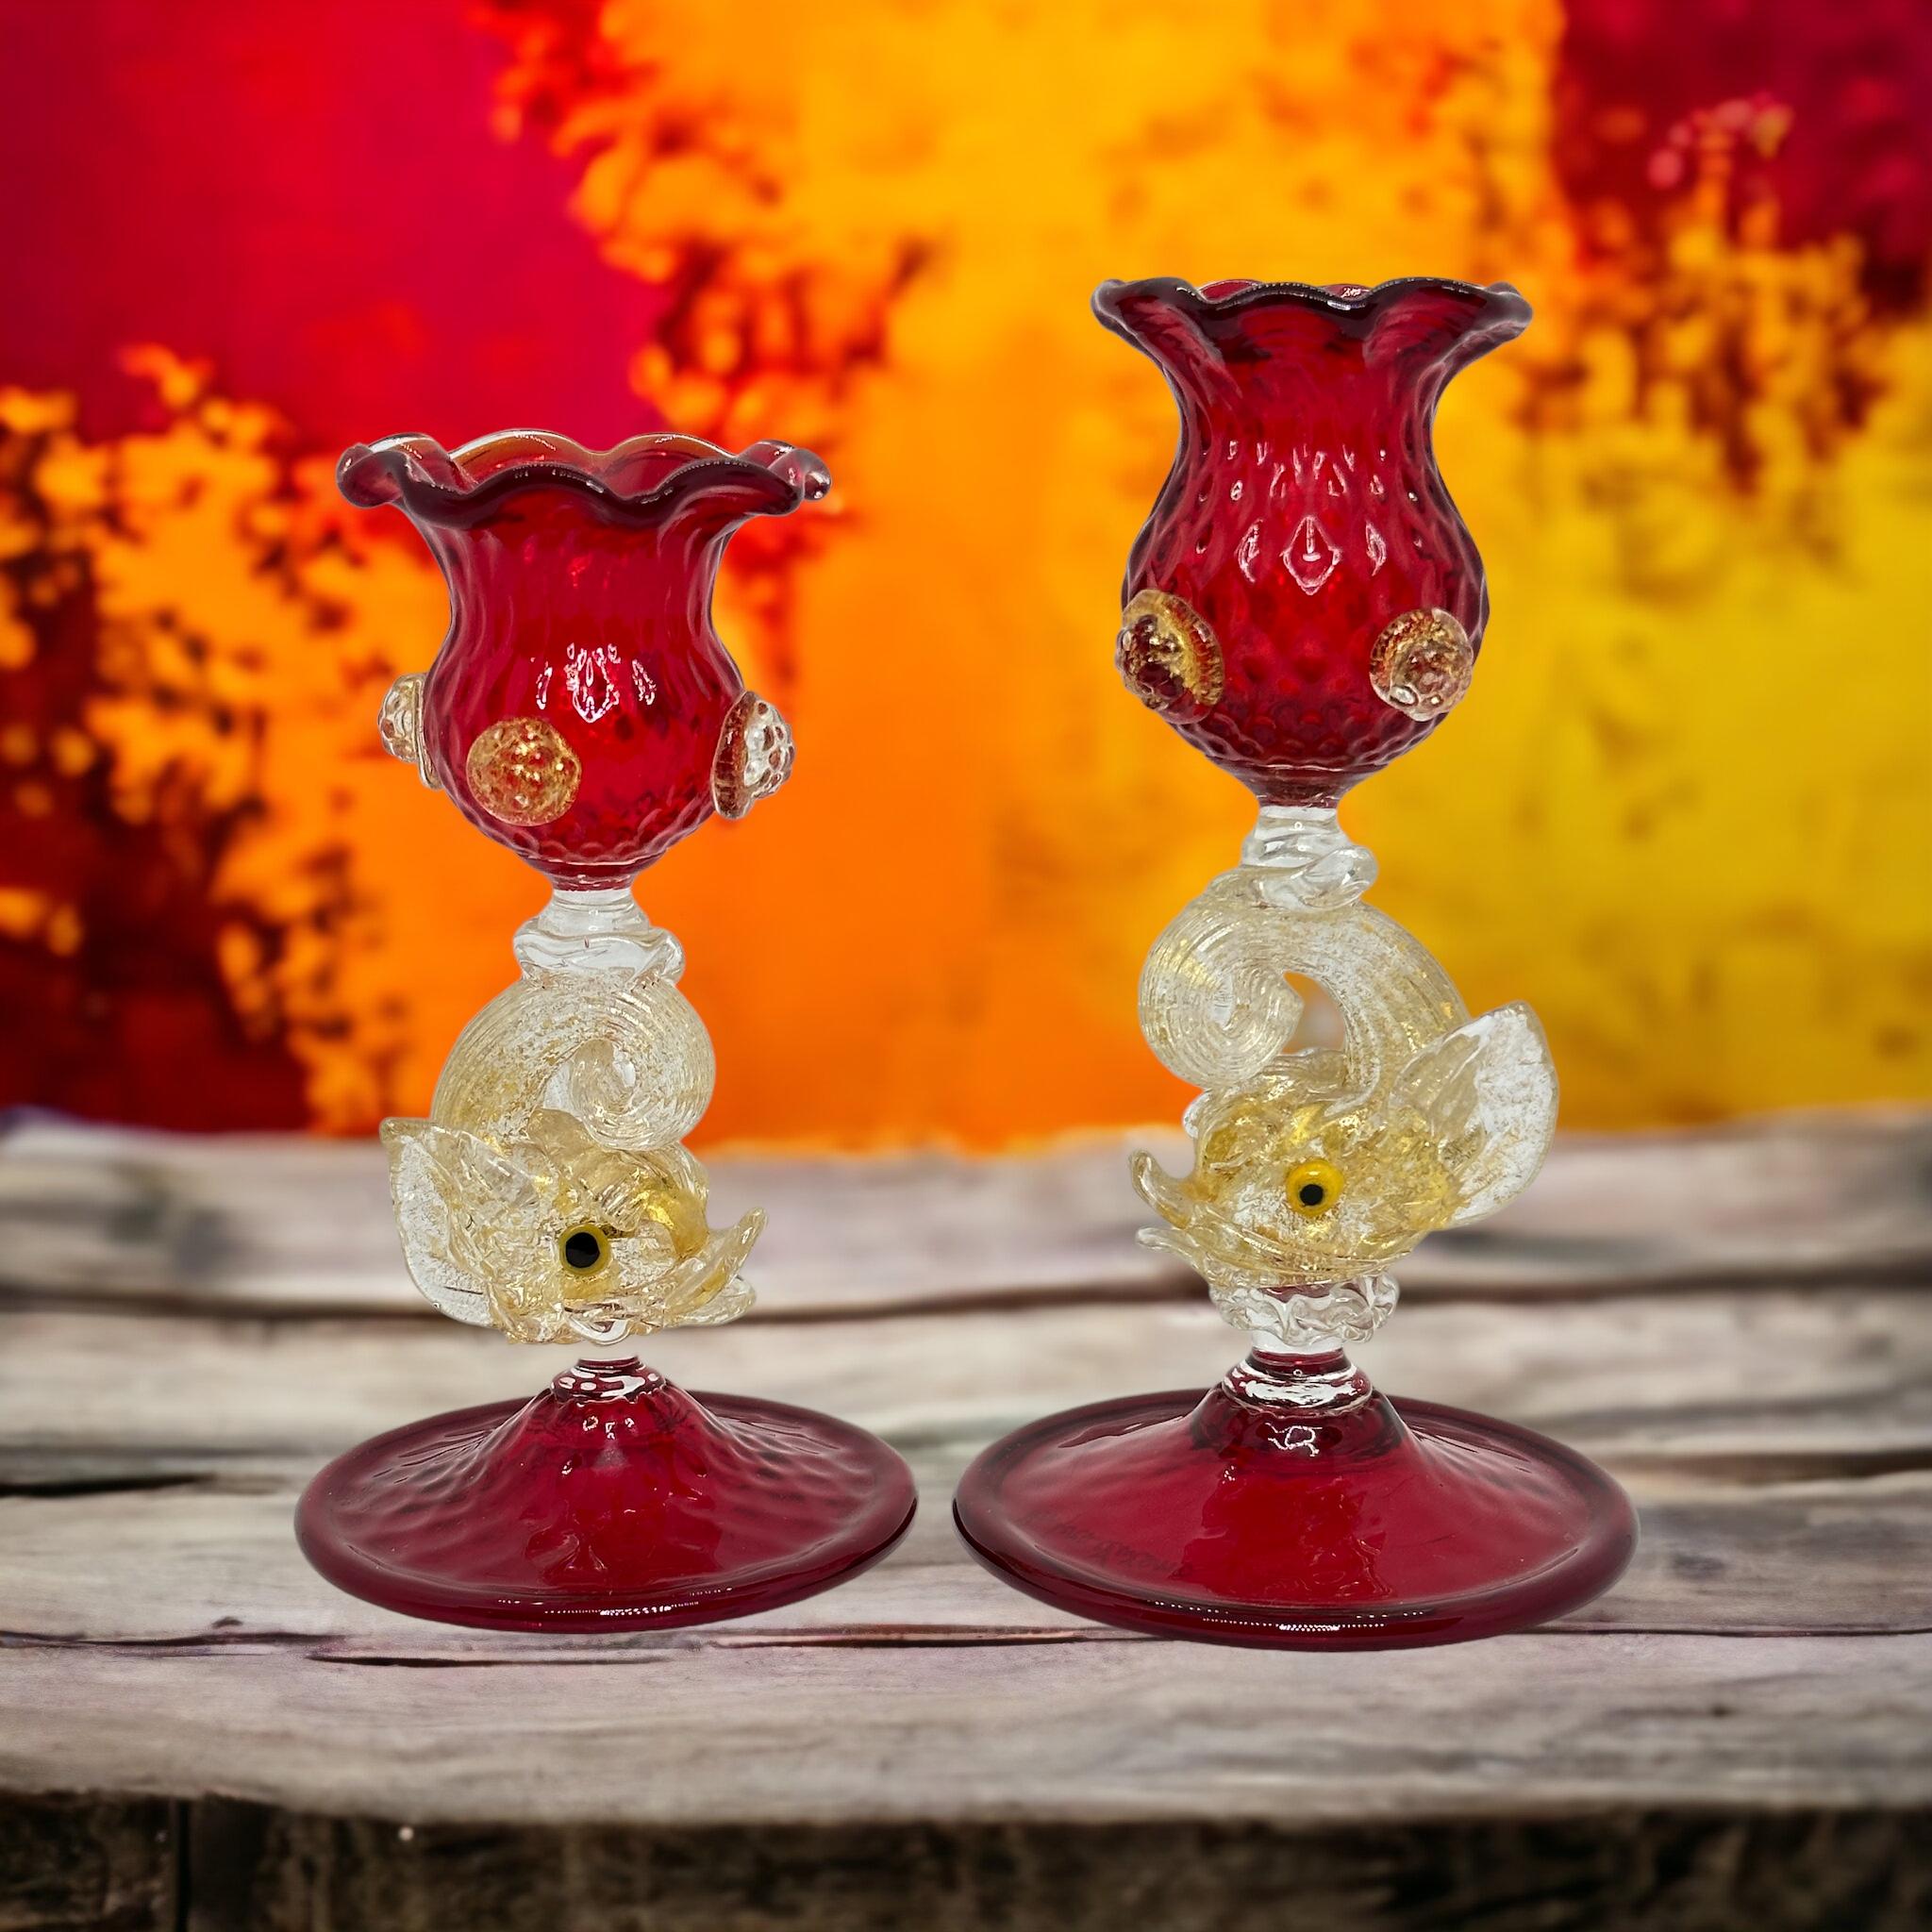 A beautiful set of two Venetian art glass dolphin candle holders. These Murano glass candle holders on display add a touch of luxury to any occasion. This unique, 100% hand-blown masterpiece is characterized by great attention to detail. Ruby red